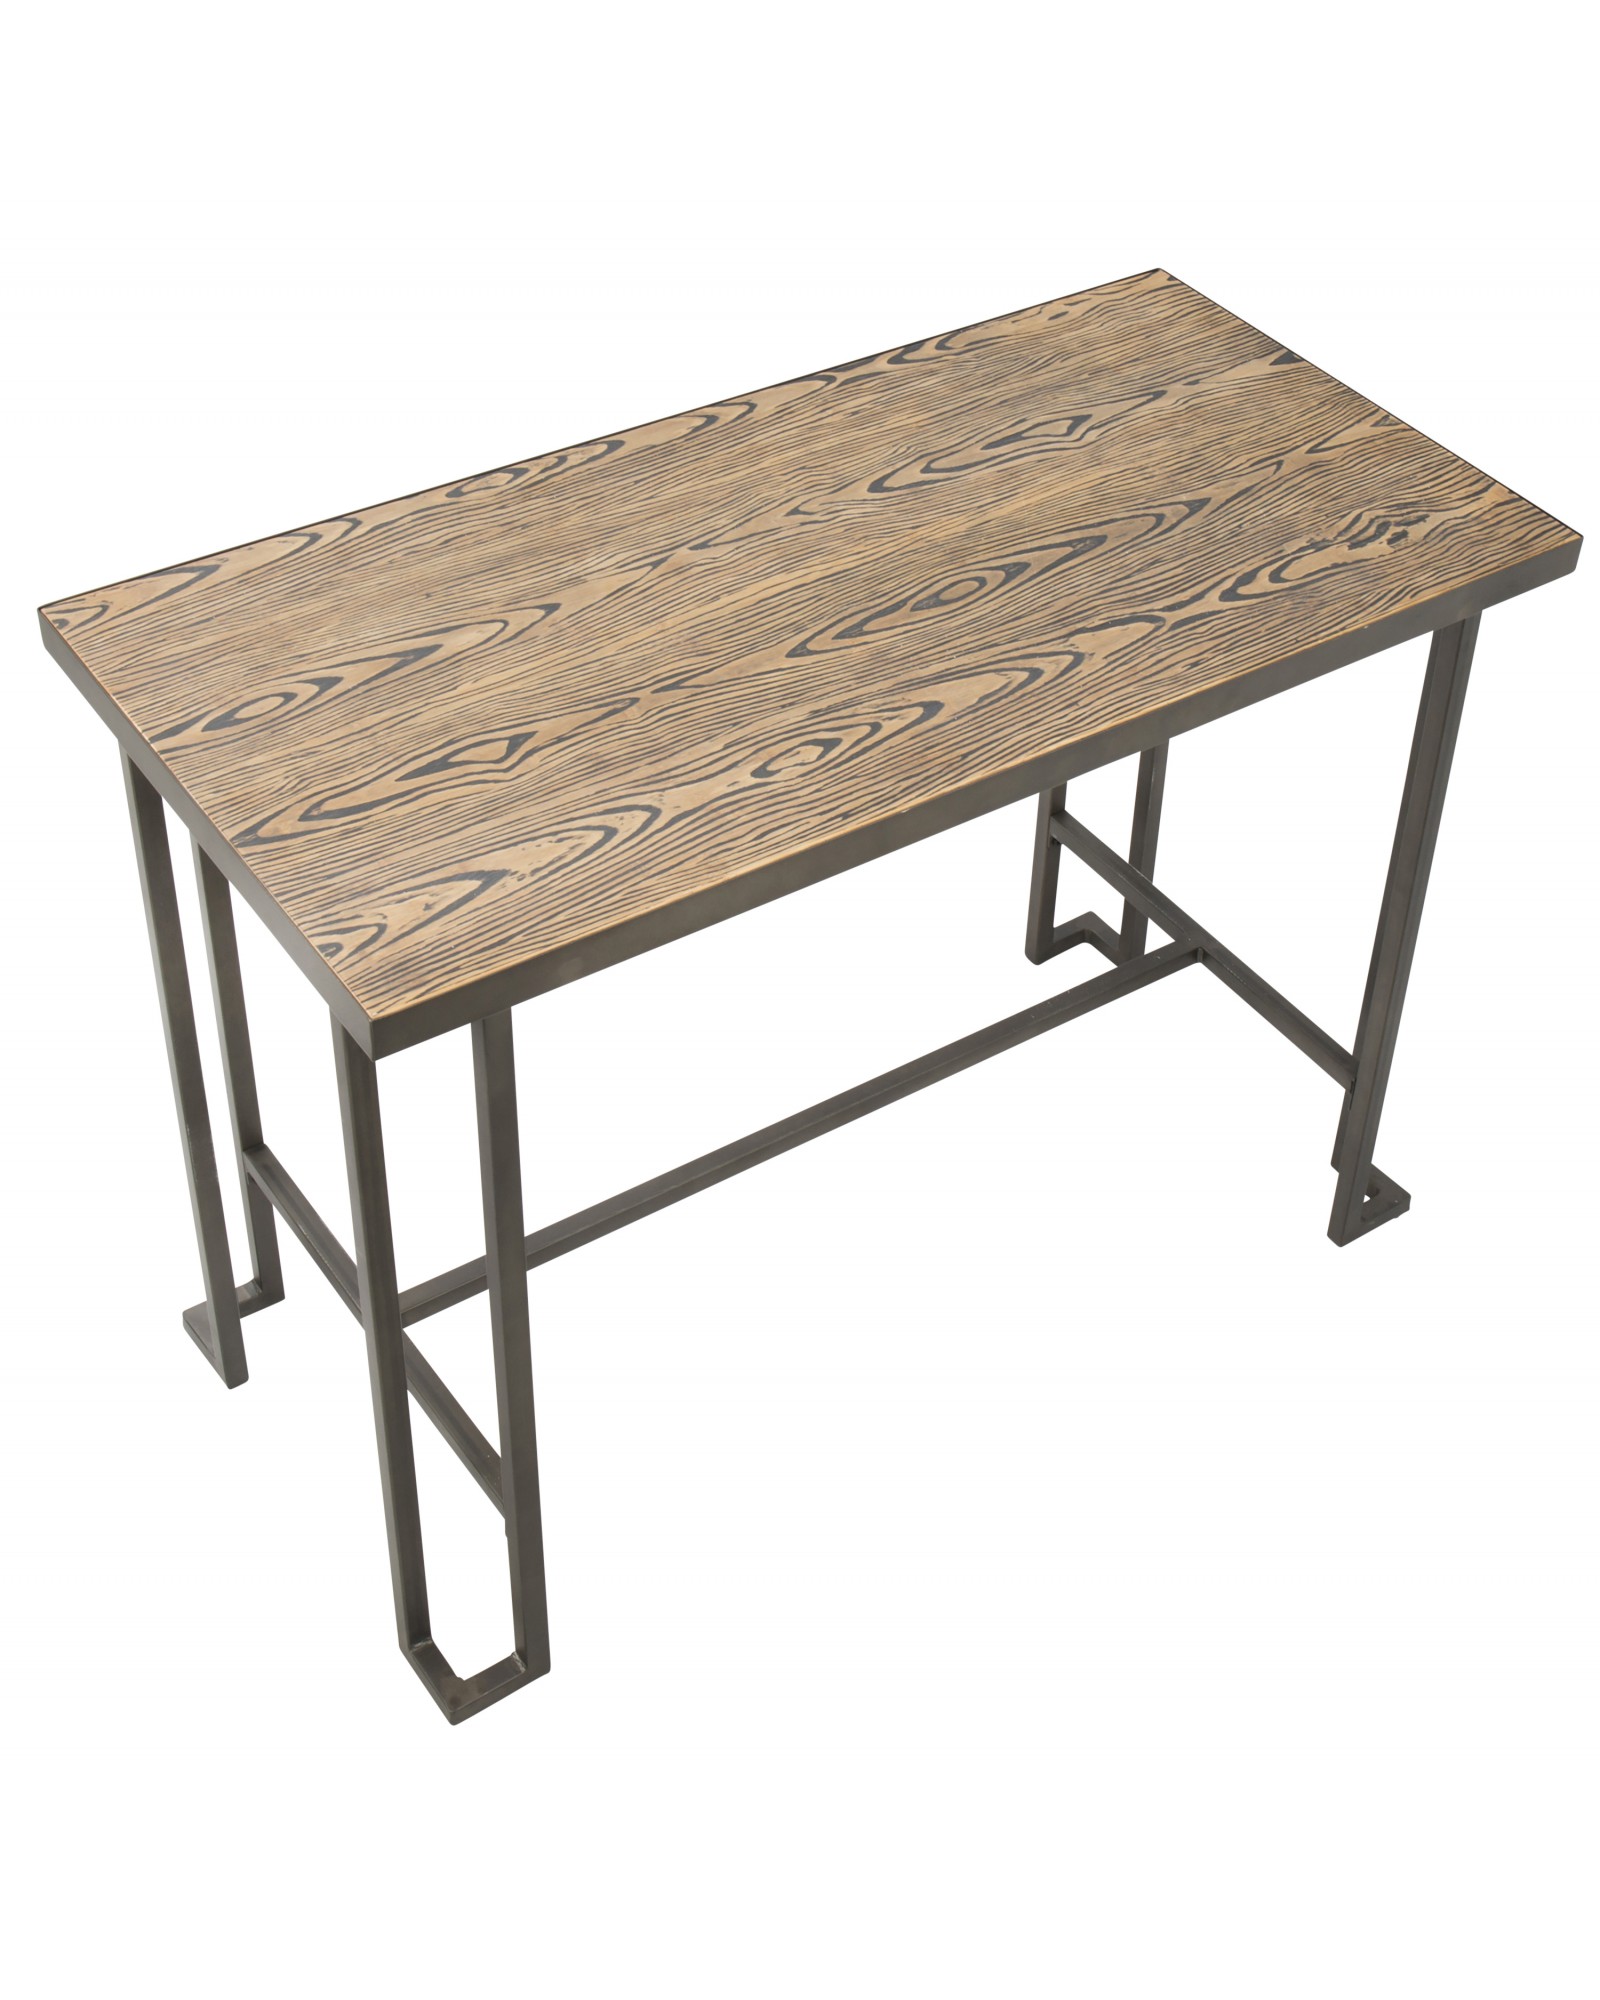 Roman Industrial Counter Table in Antique and Brown